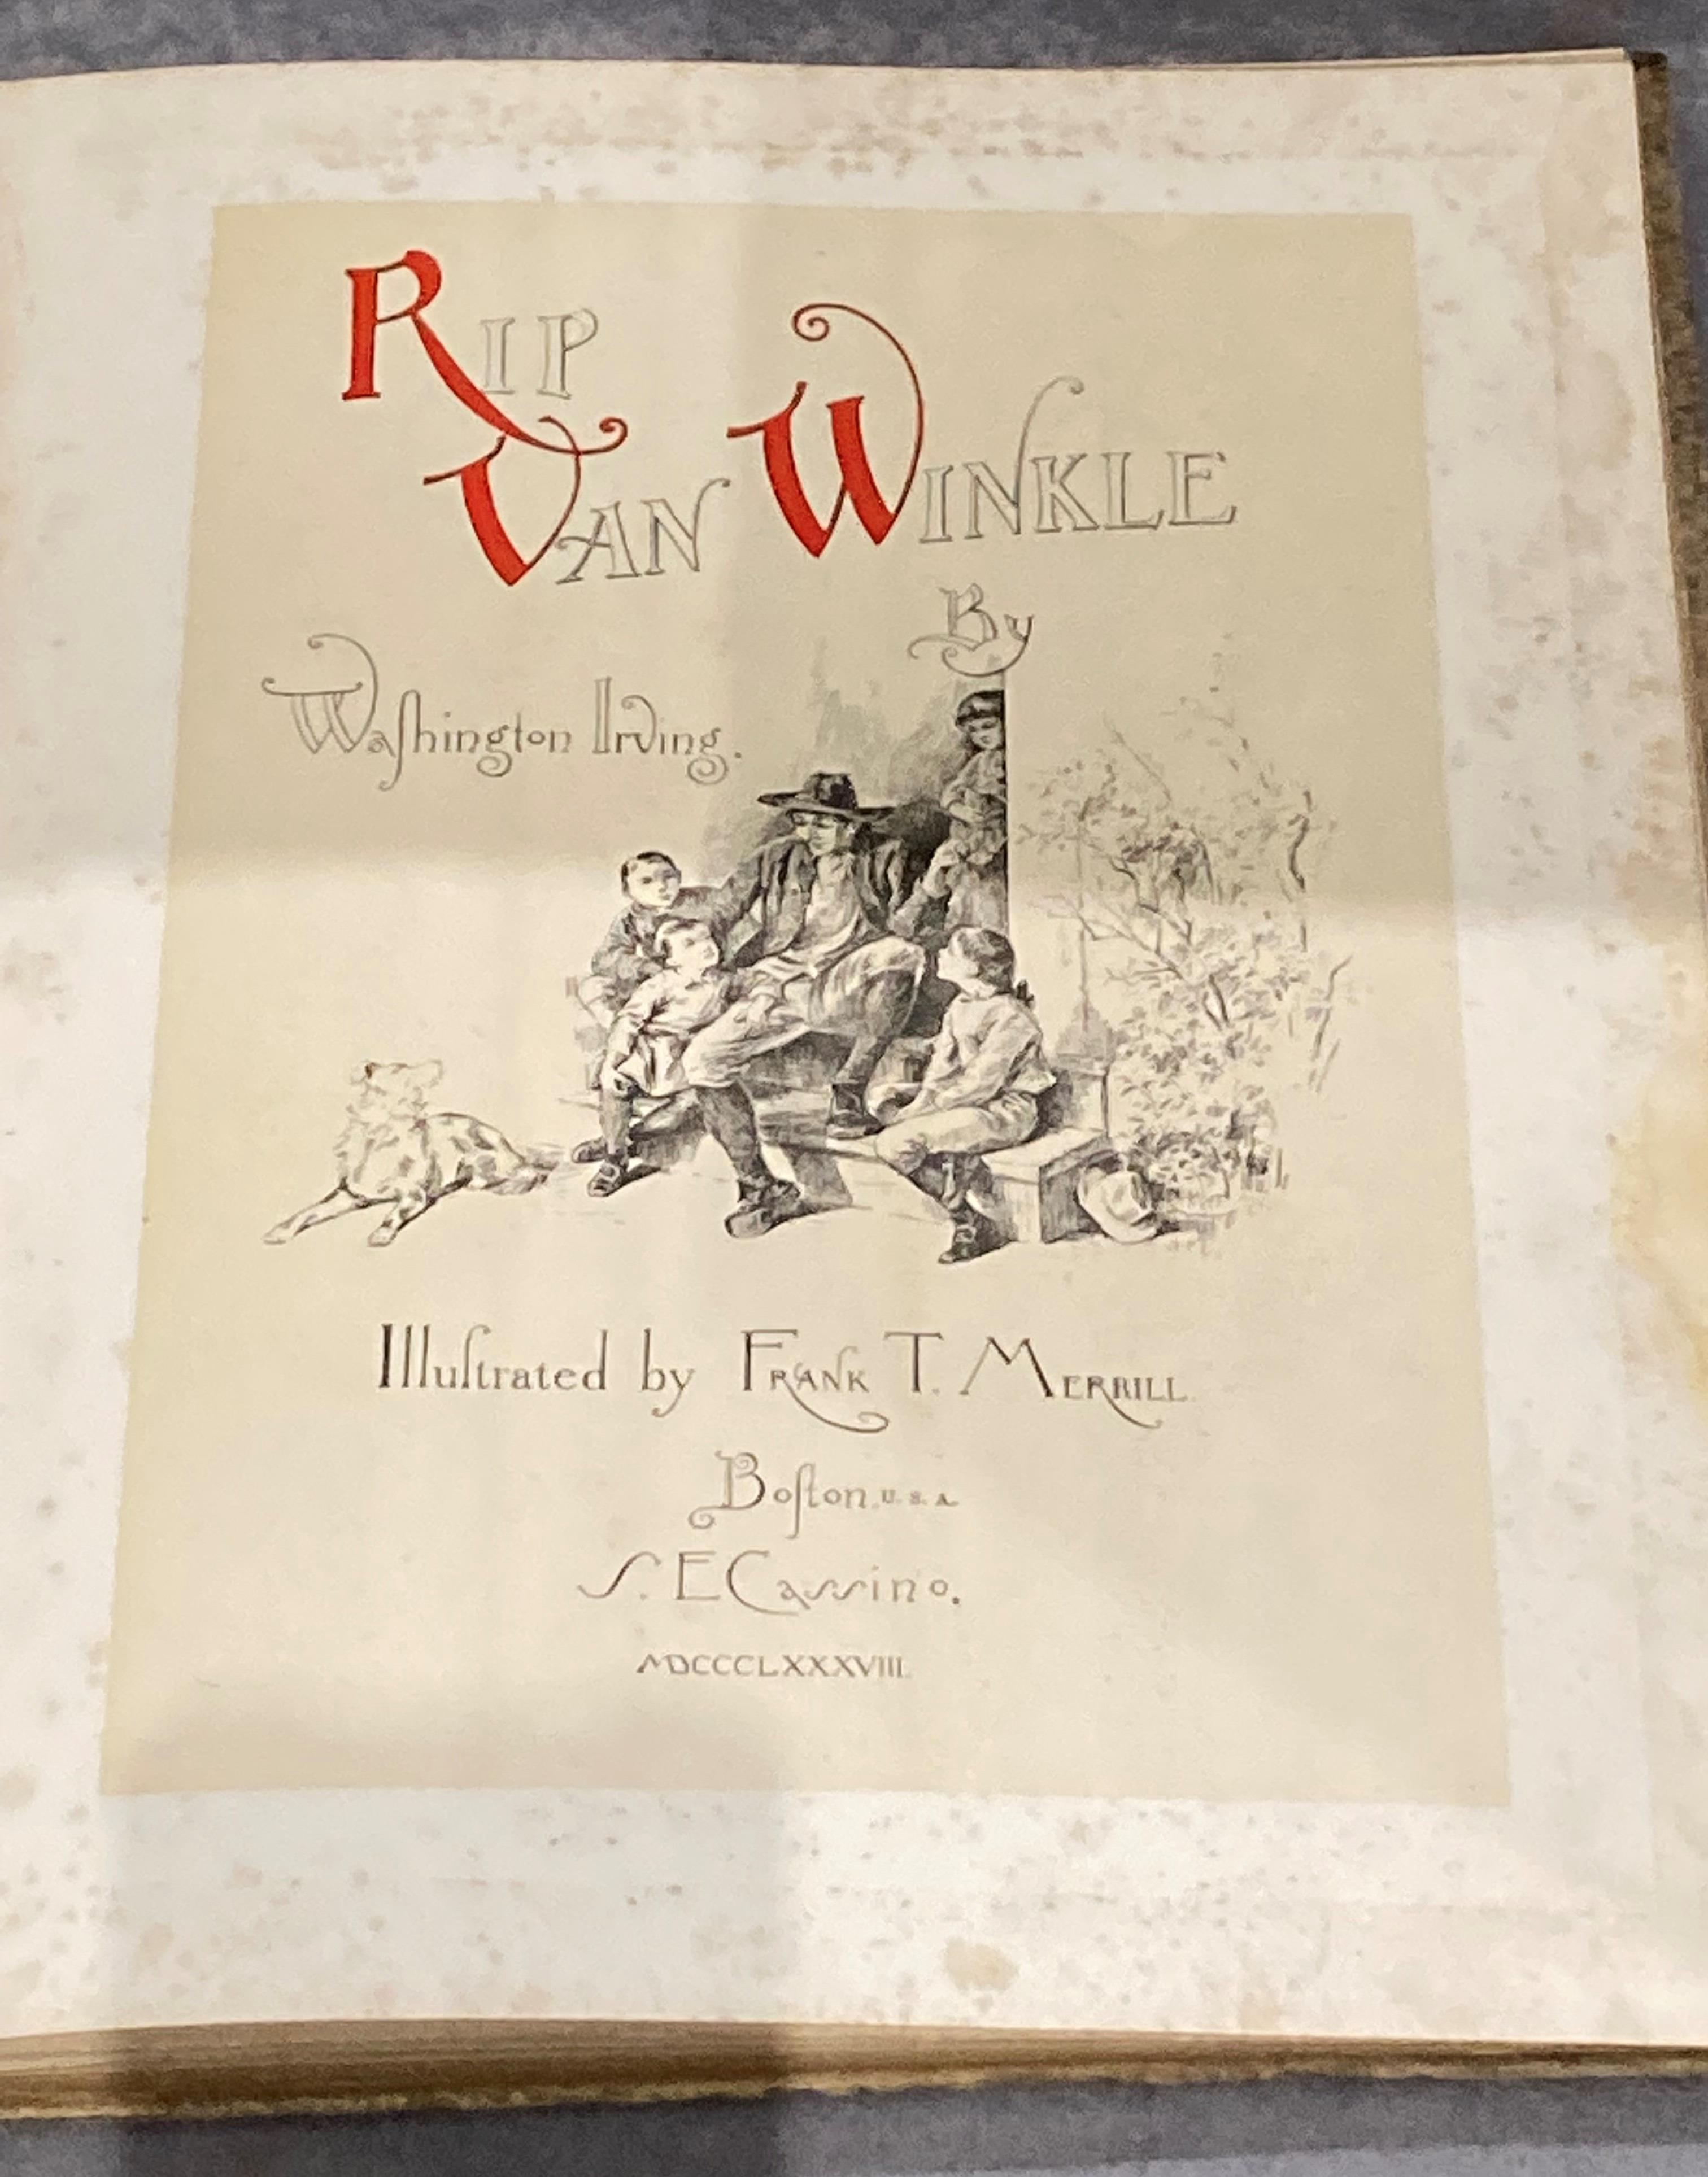 Washington Irving 'Rip Van Winkle' 1888 - Limited Edition copy for the United Kingdom 1888 no - Image 8 of 9